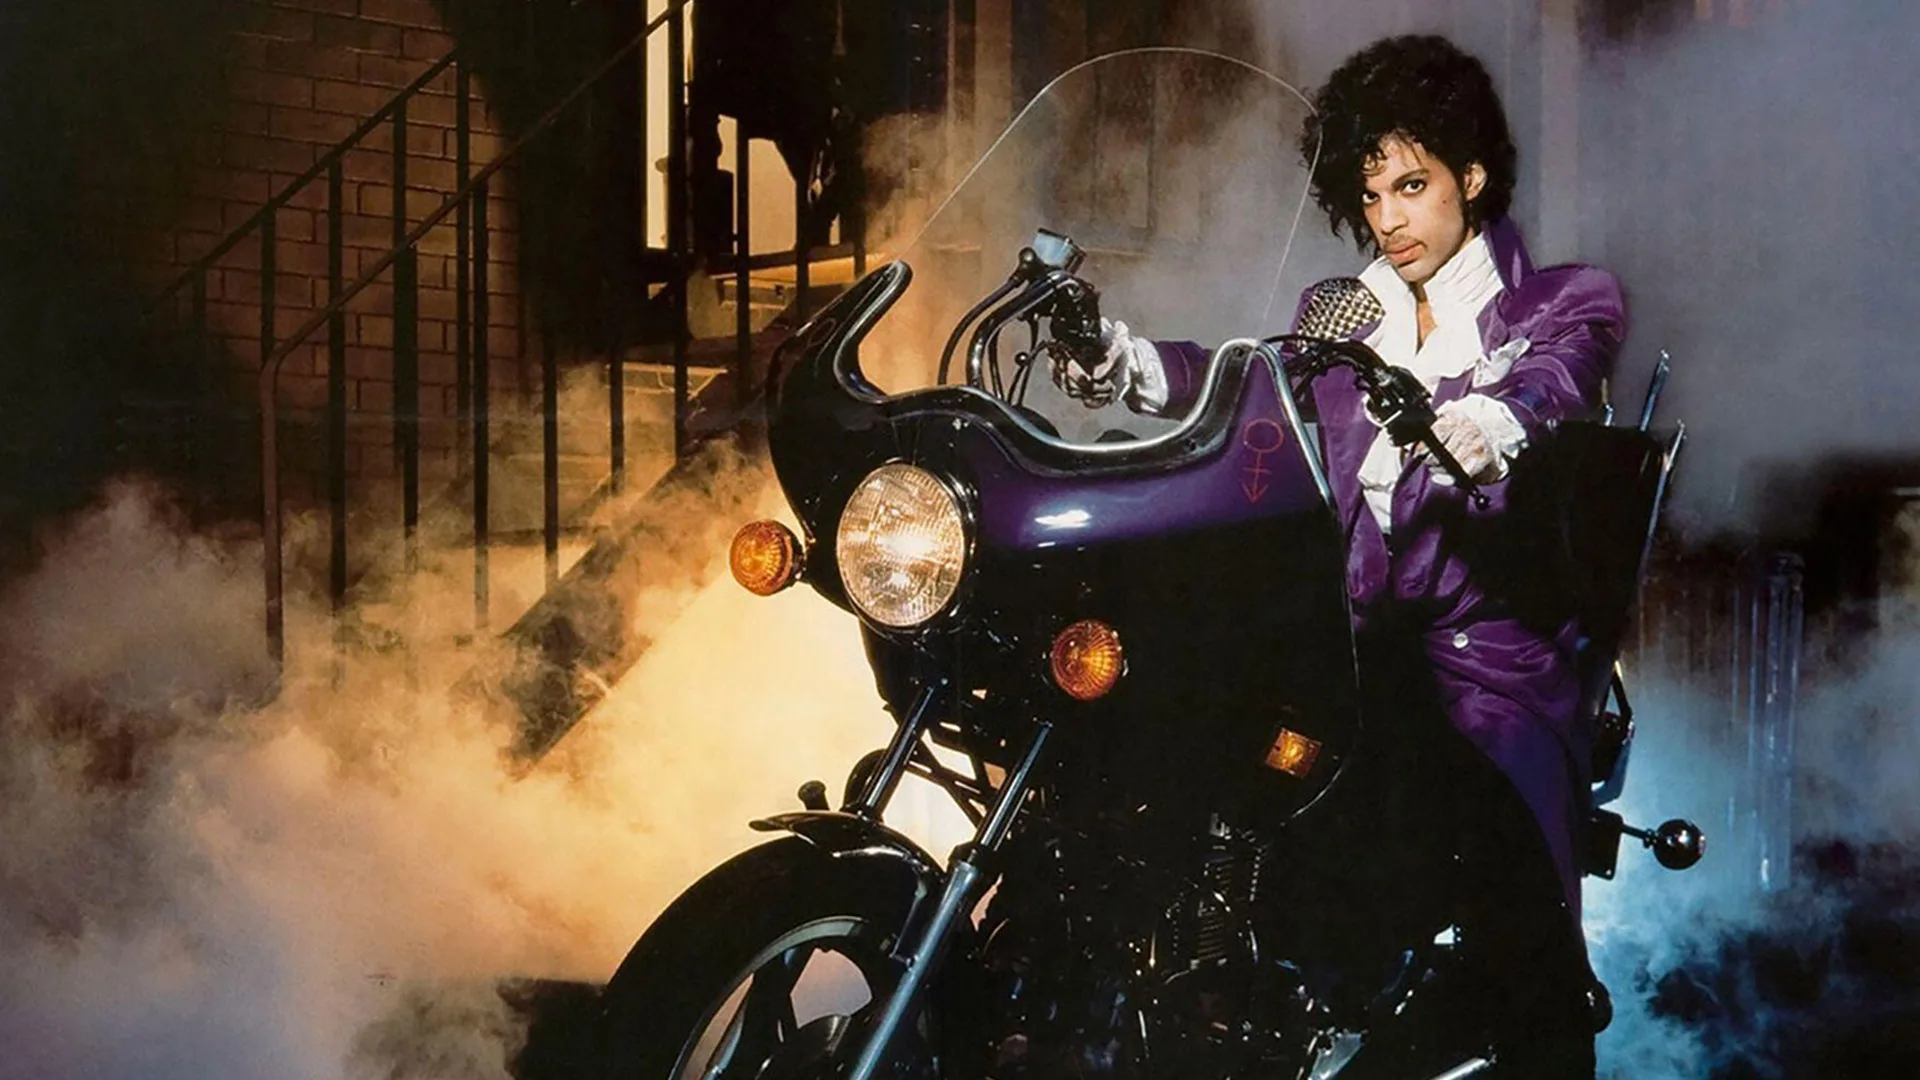 Prince image from video shoot